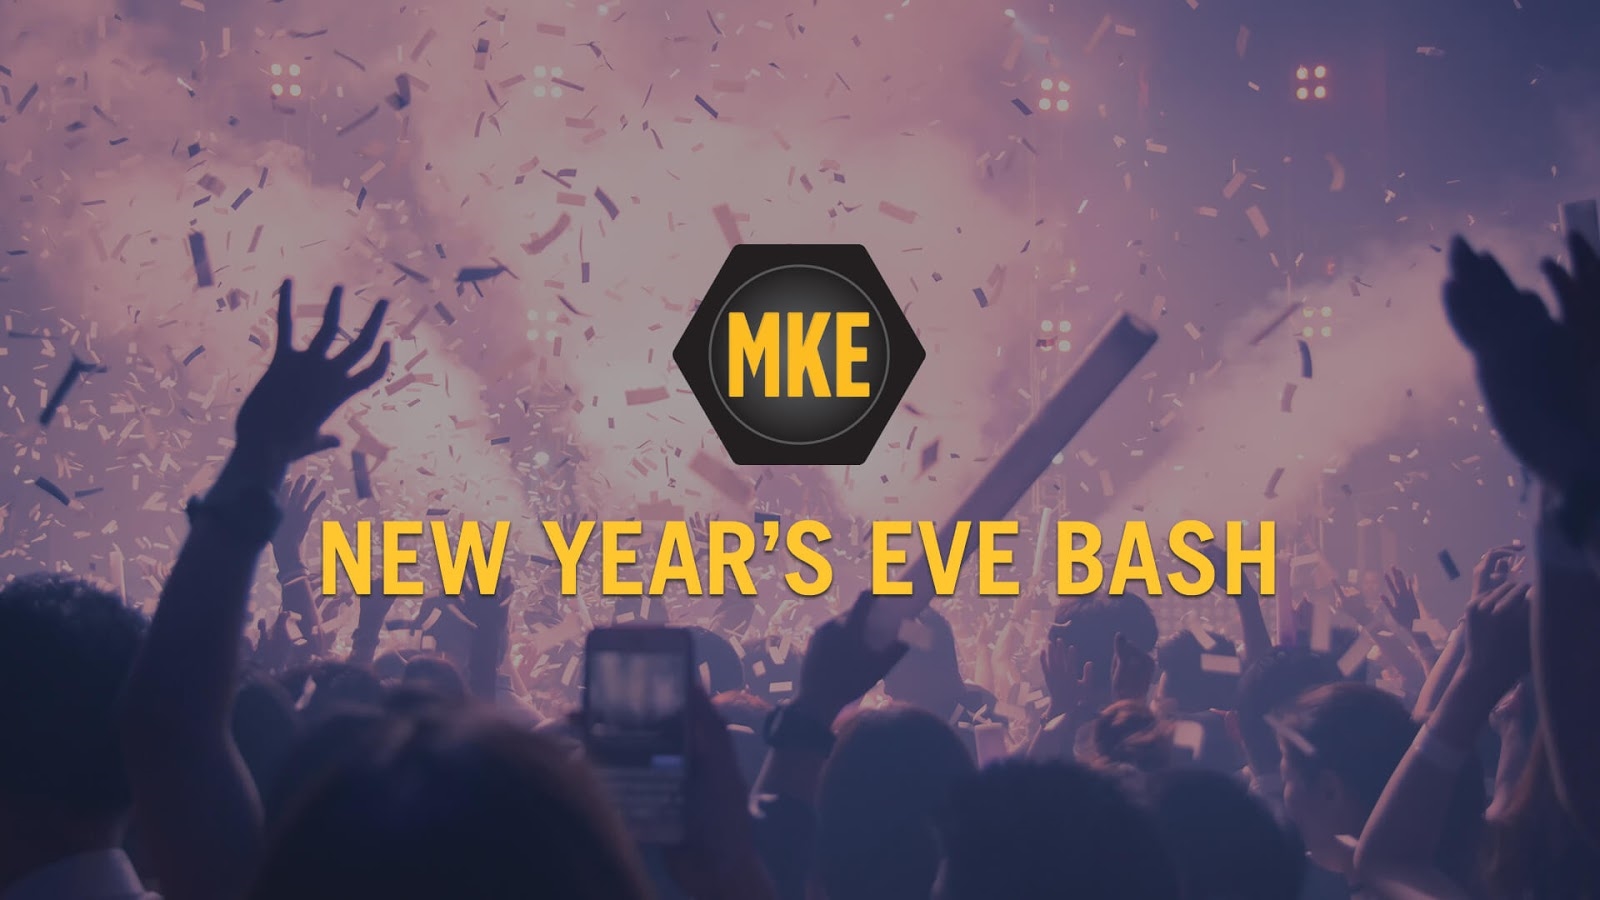 MKE Brewing Co., Glass + Griddle, and Venue Forty Two Bringing the House Down for New Years